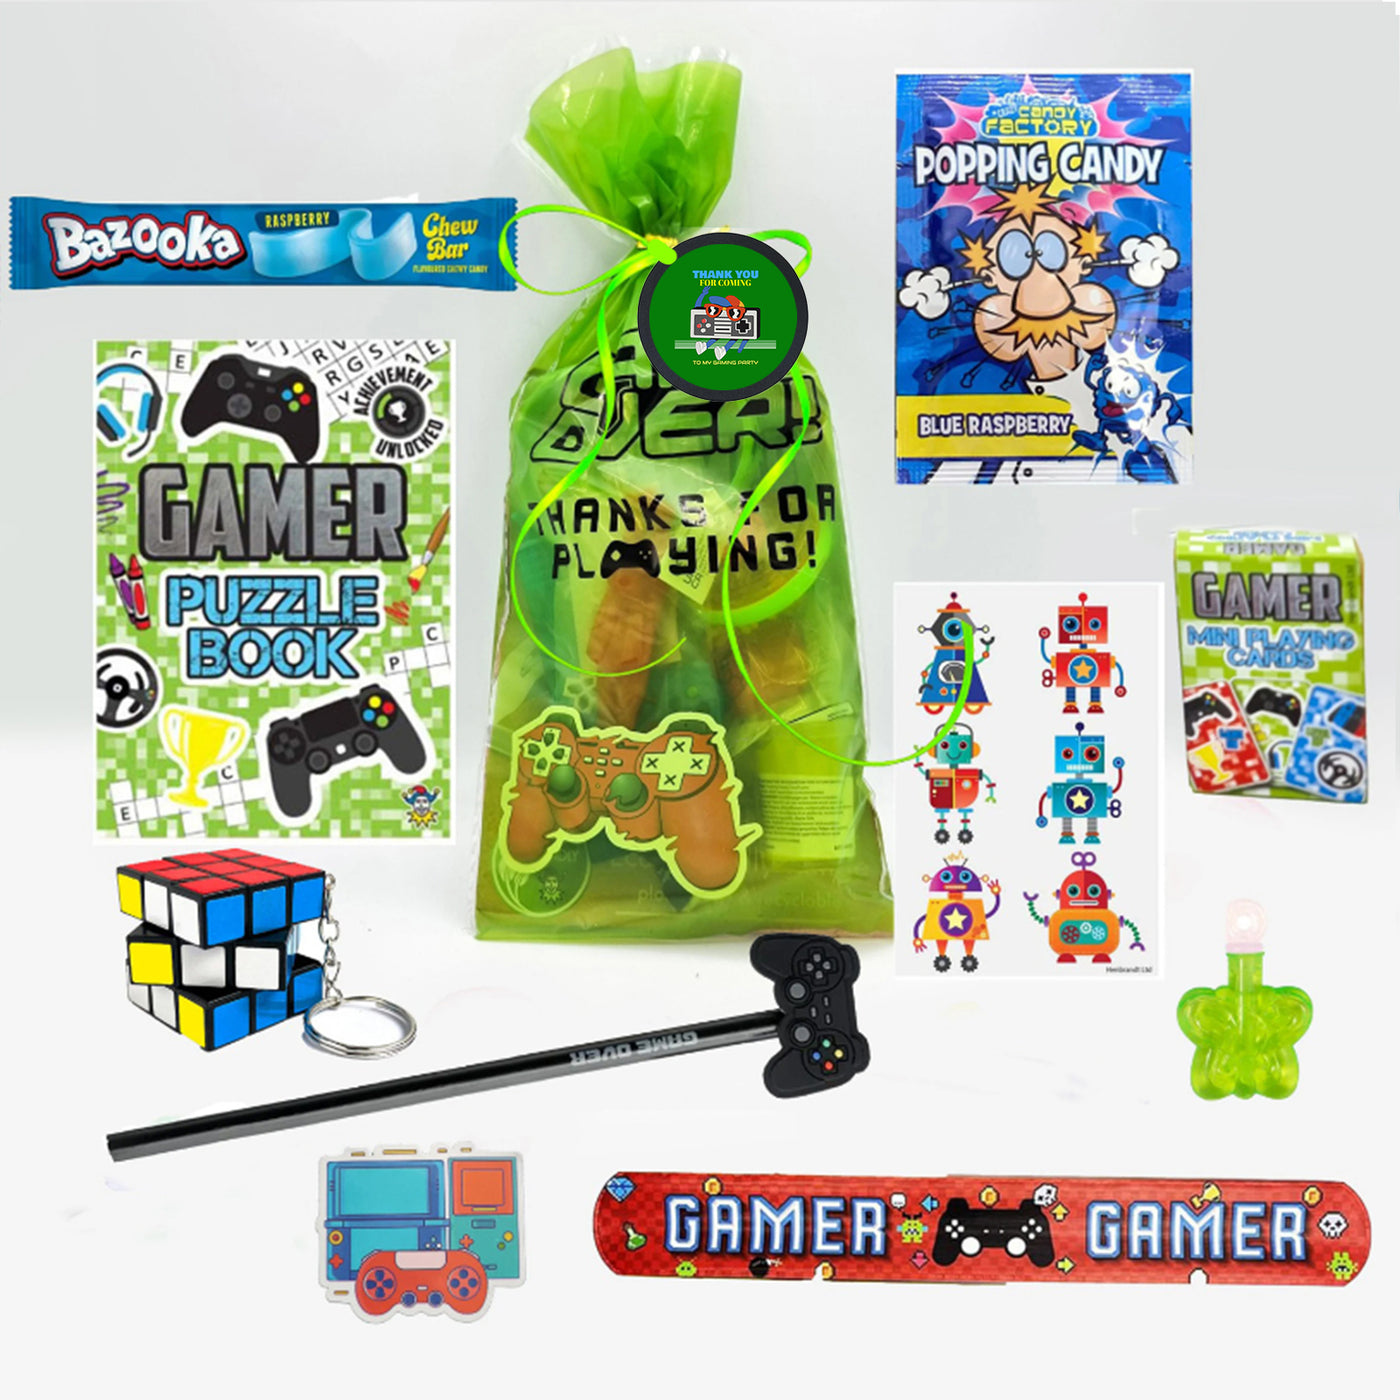 Ready Made Gamer Birthday Party Goody Bags With TRoys And Sweets. Party Favours For Boys And Girls.